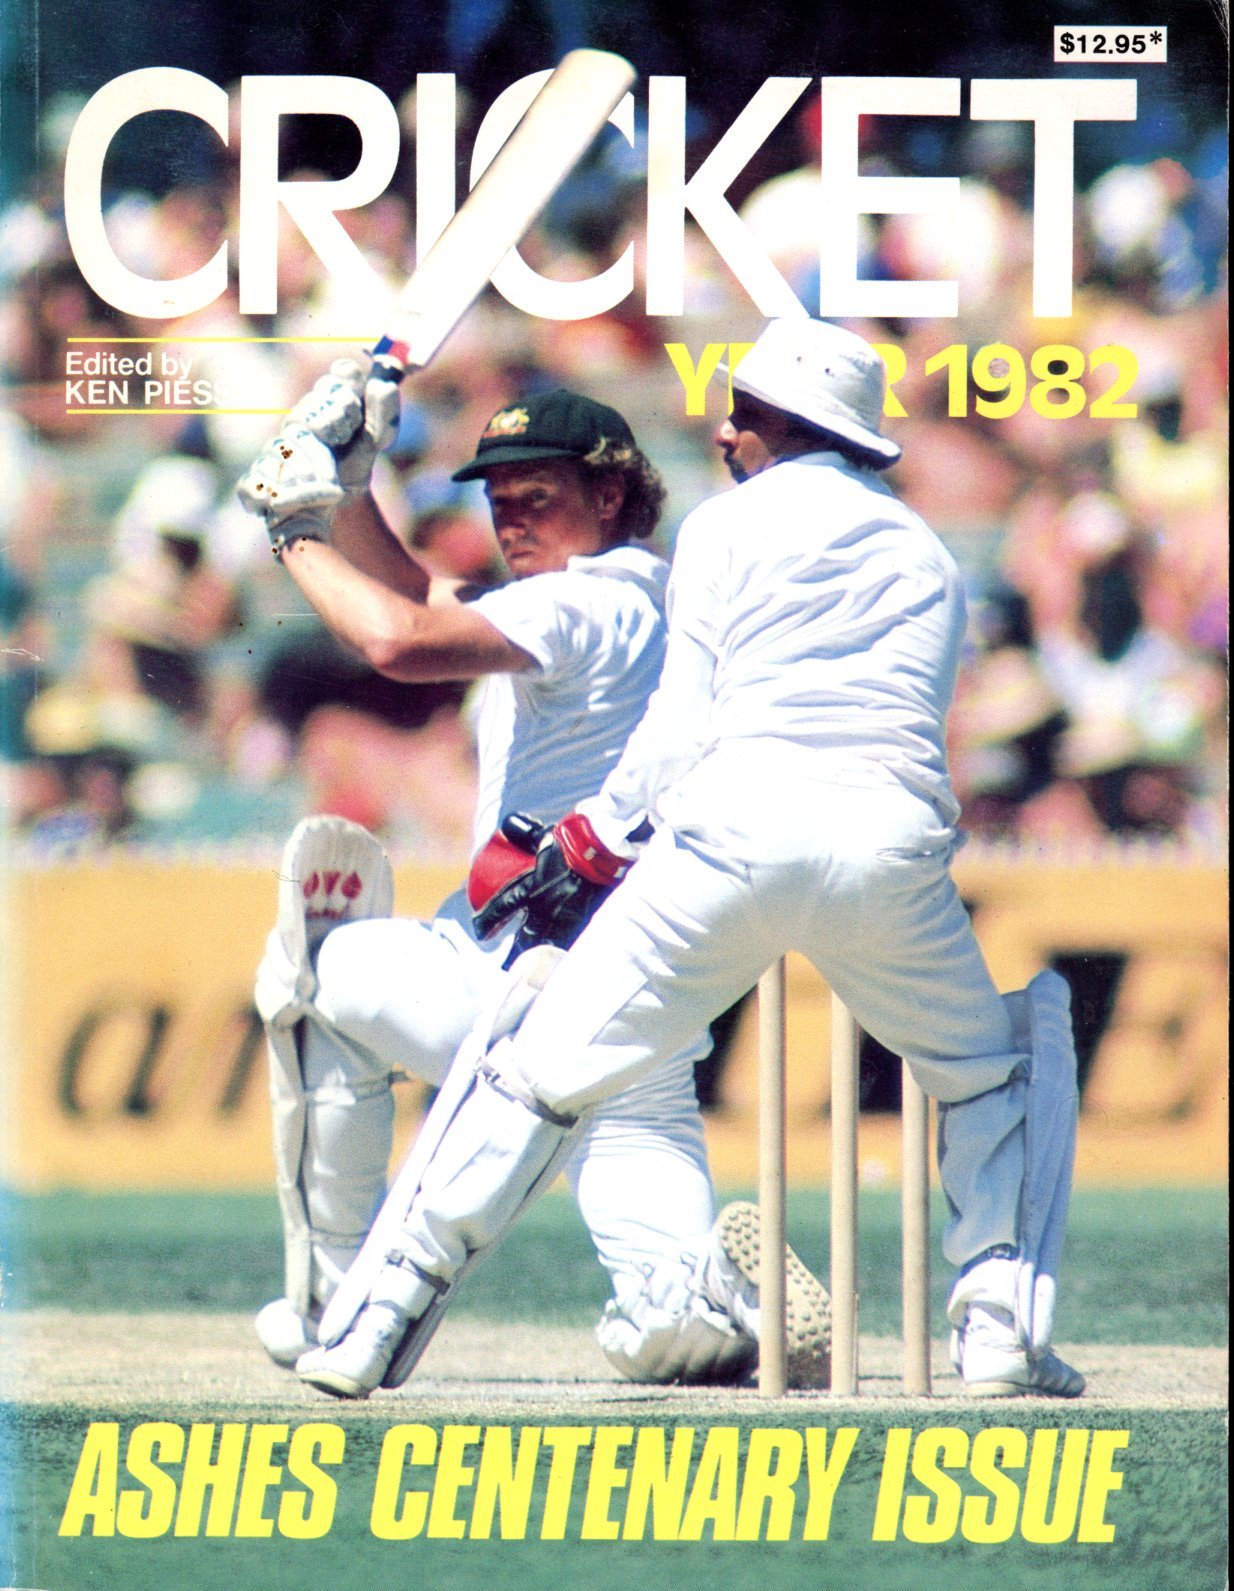 CRICKET YEAR - 1982 - Overseas cricket annuals: Sportspages.com